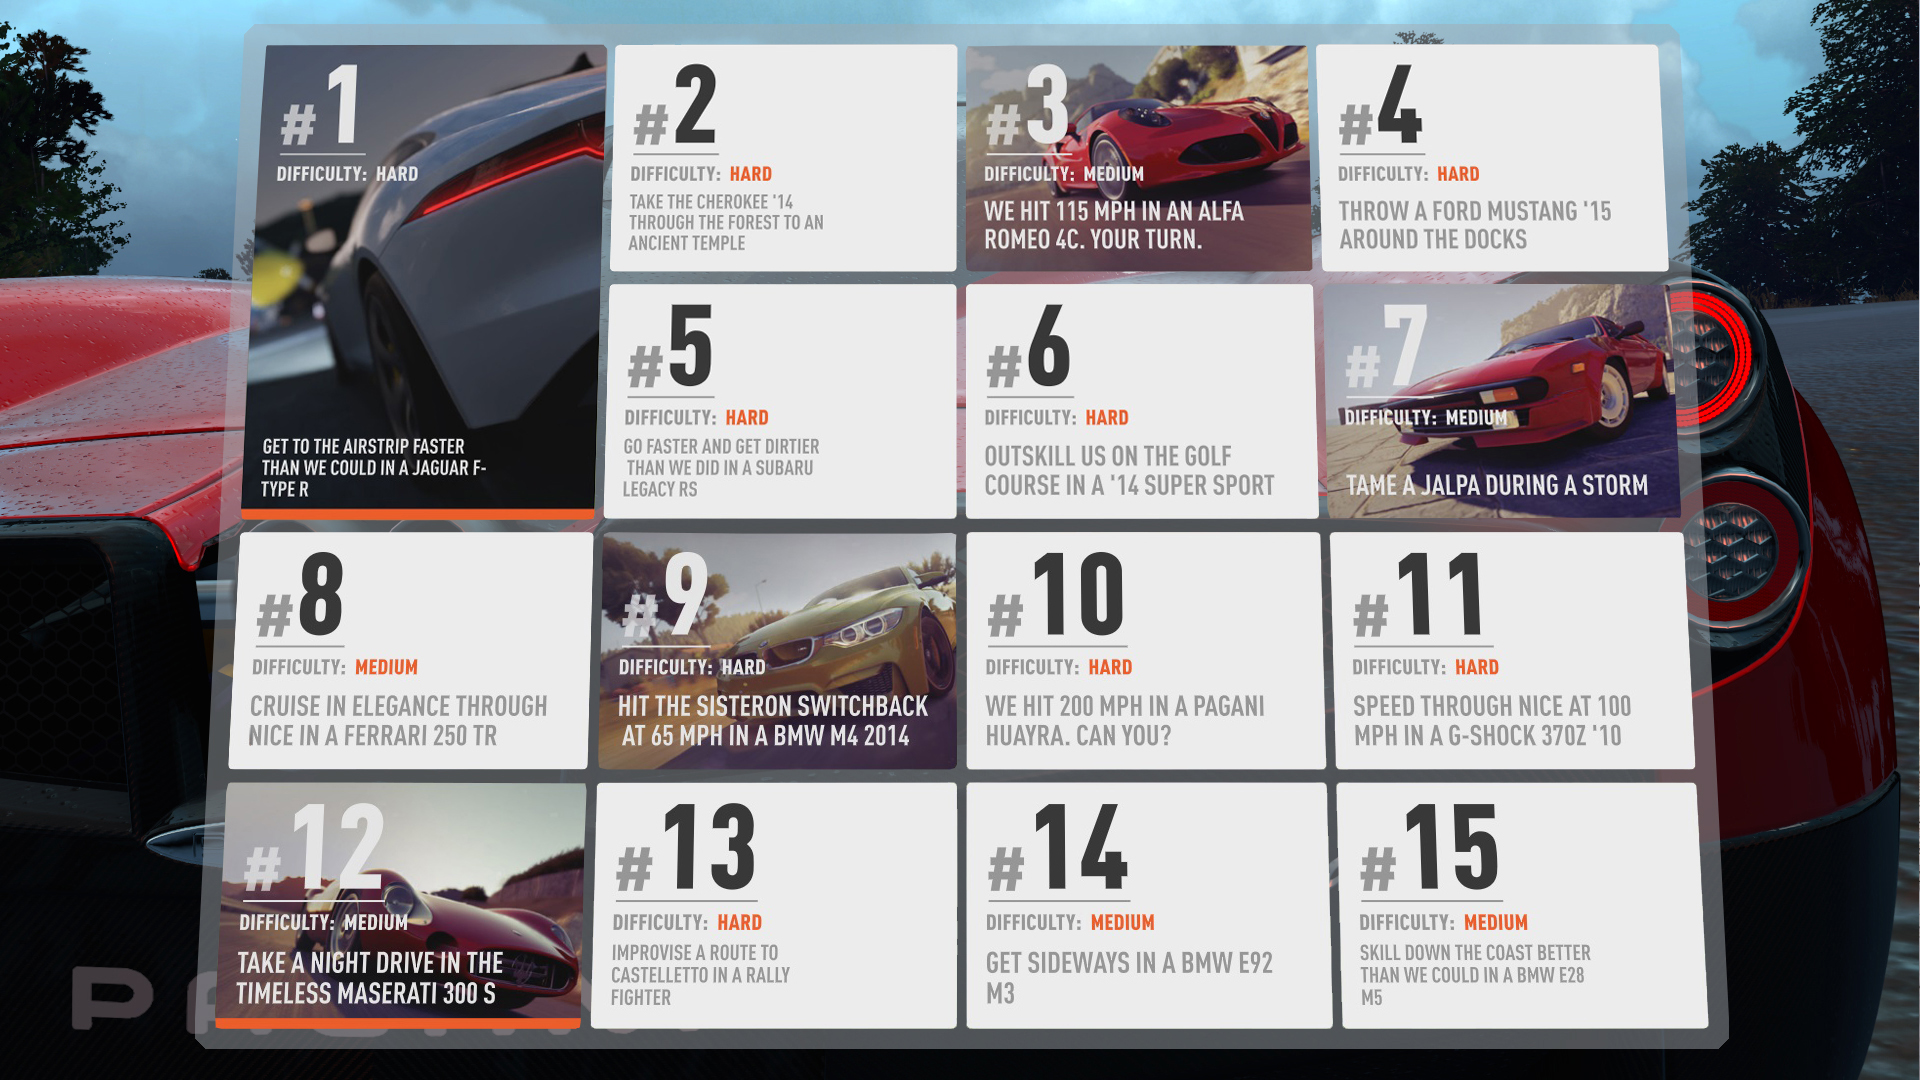 New bucket list challenges added to Forza Horizon 2 for free!